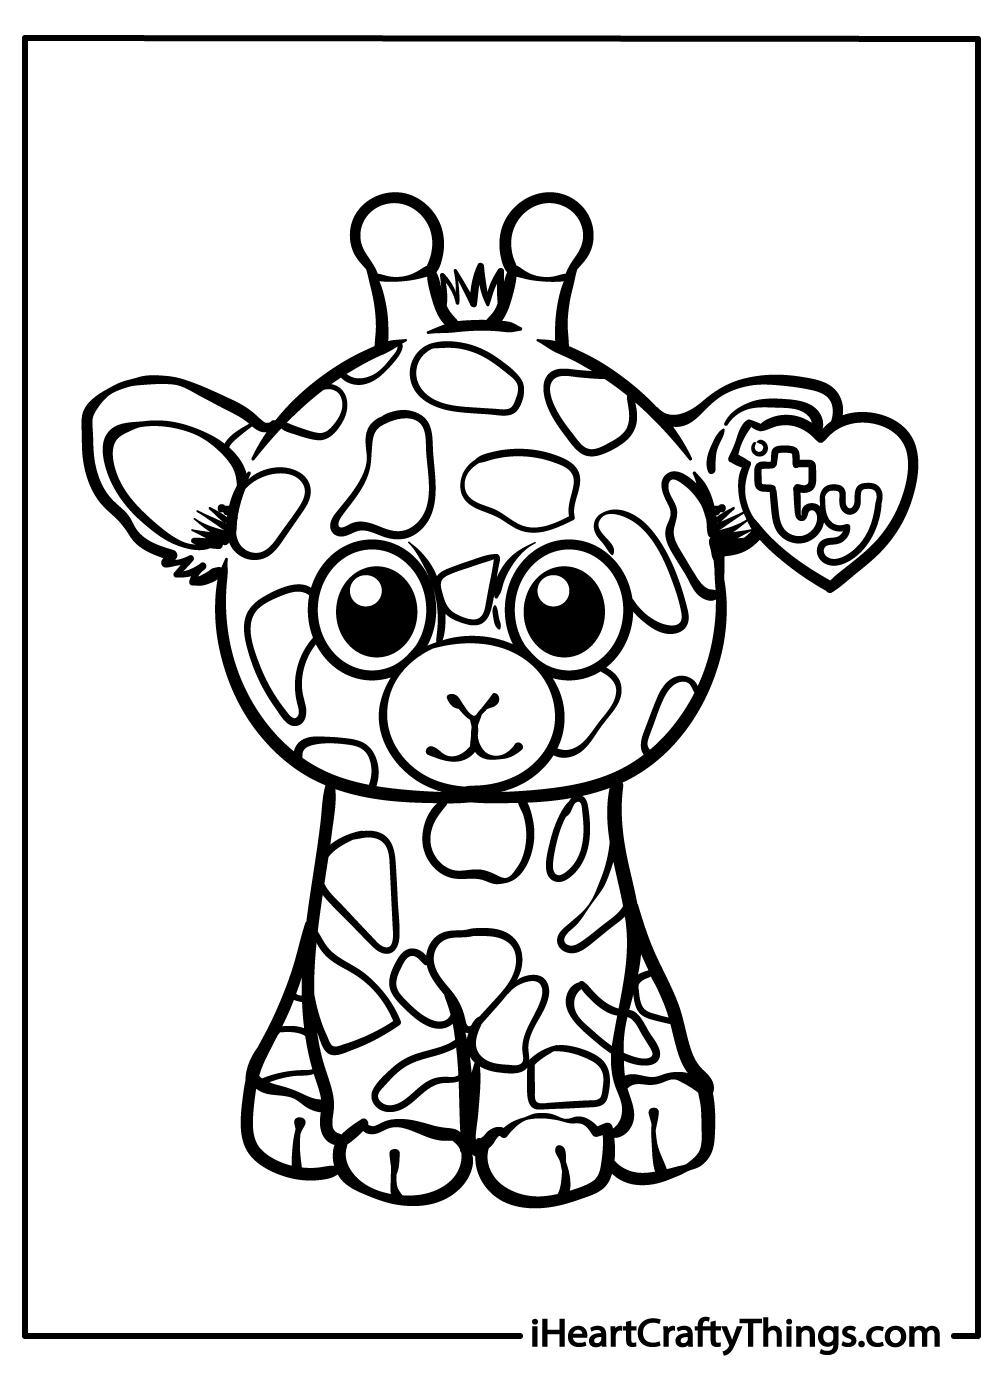 Beanie Boos Coloring Sheet for Kids